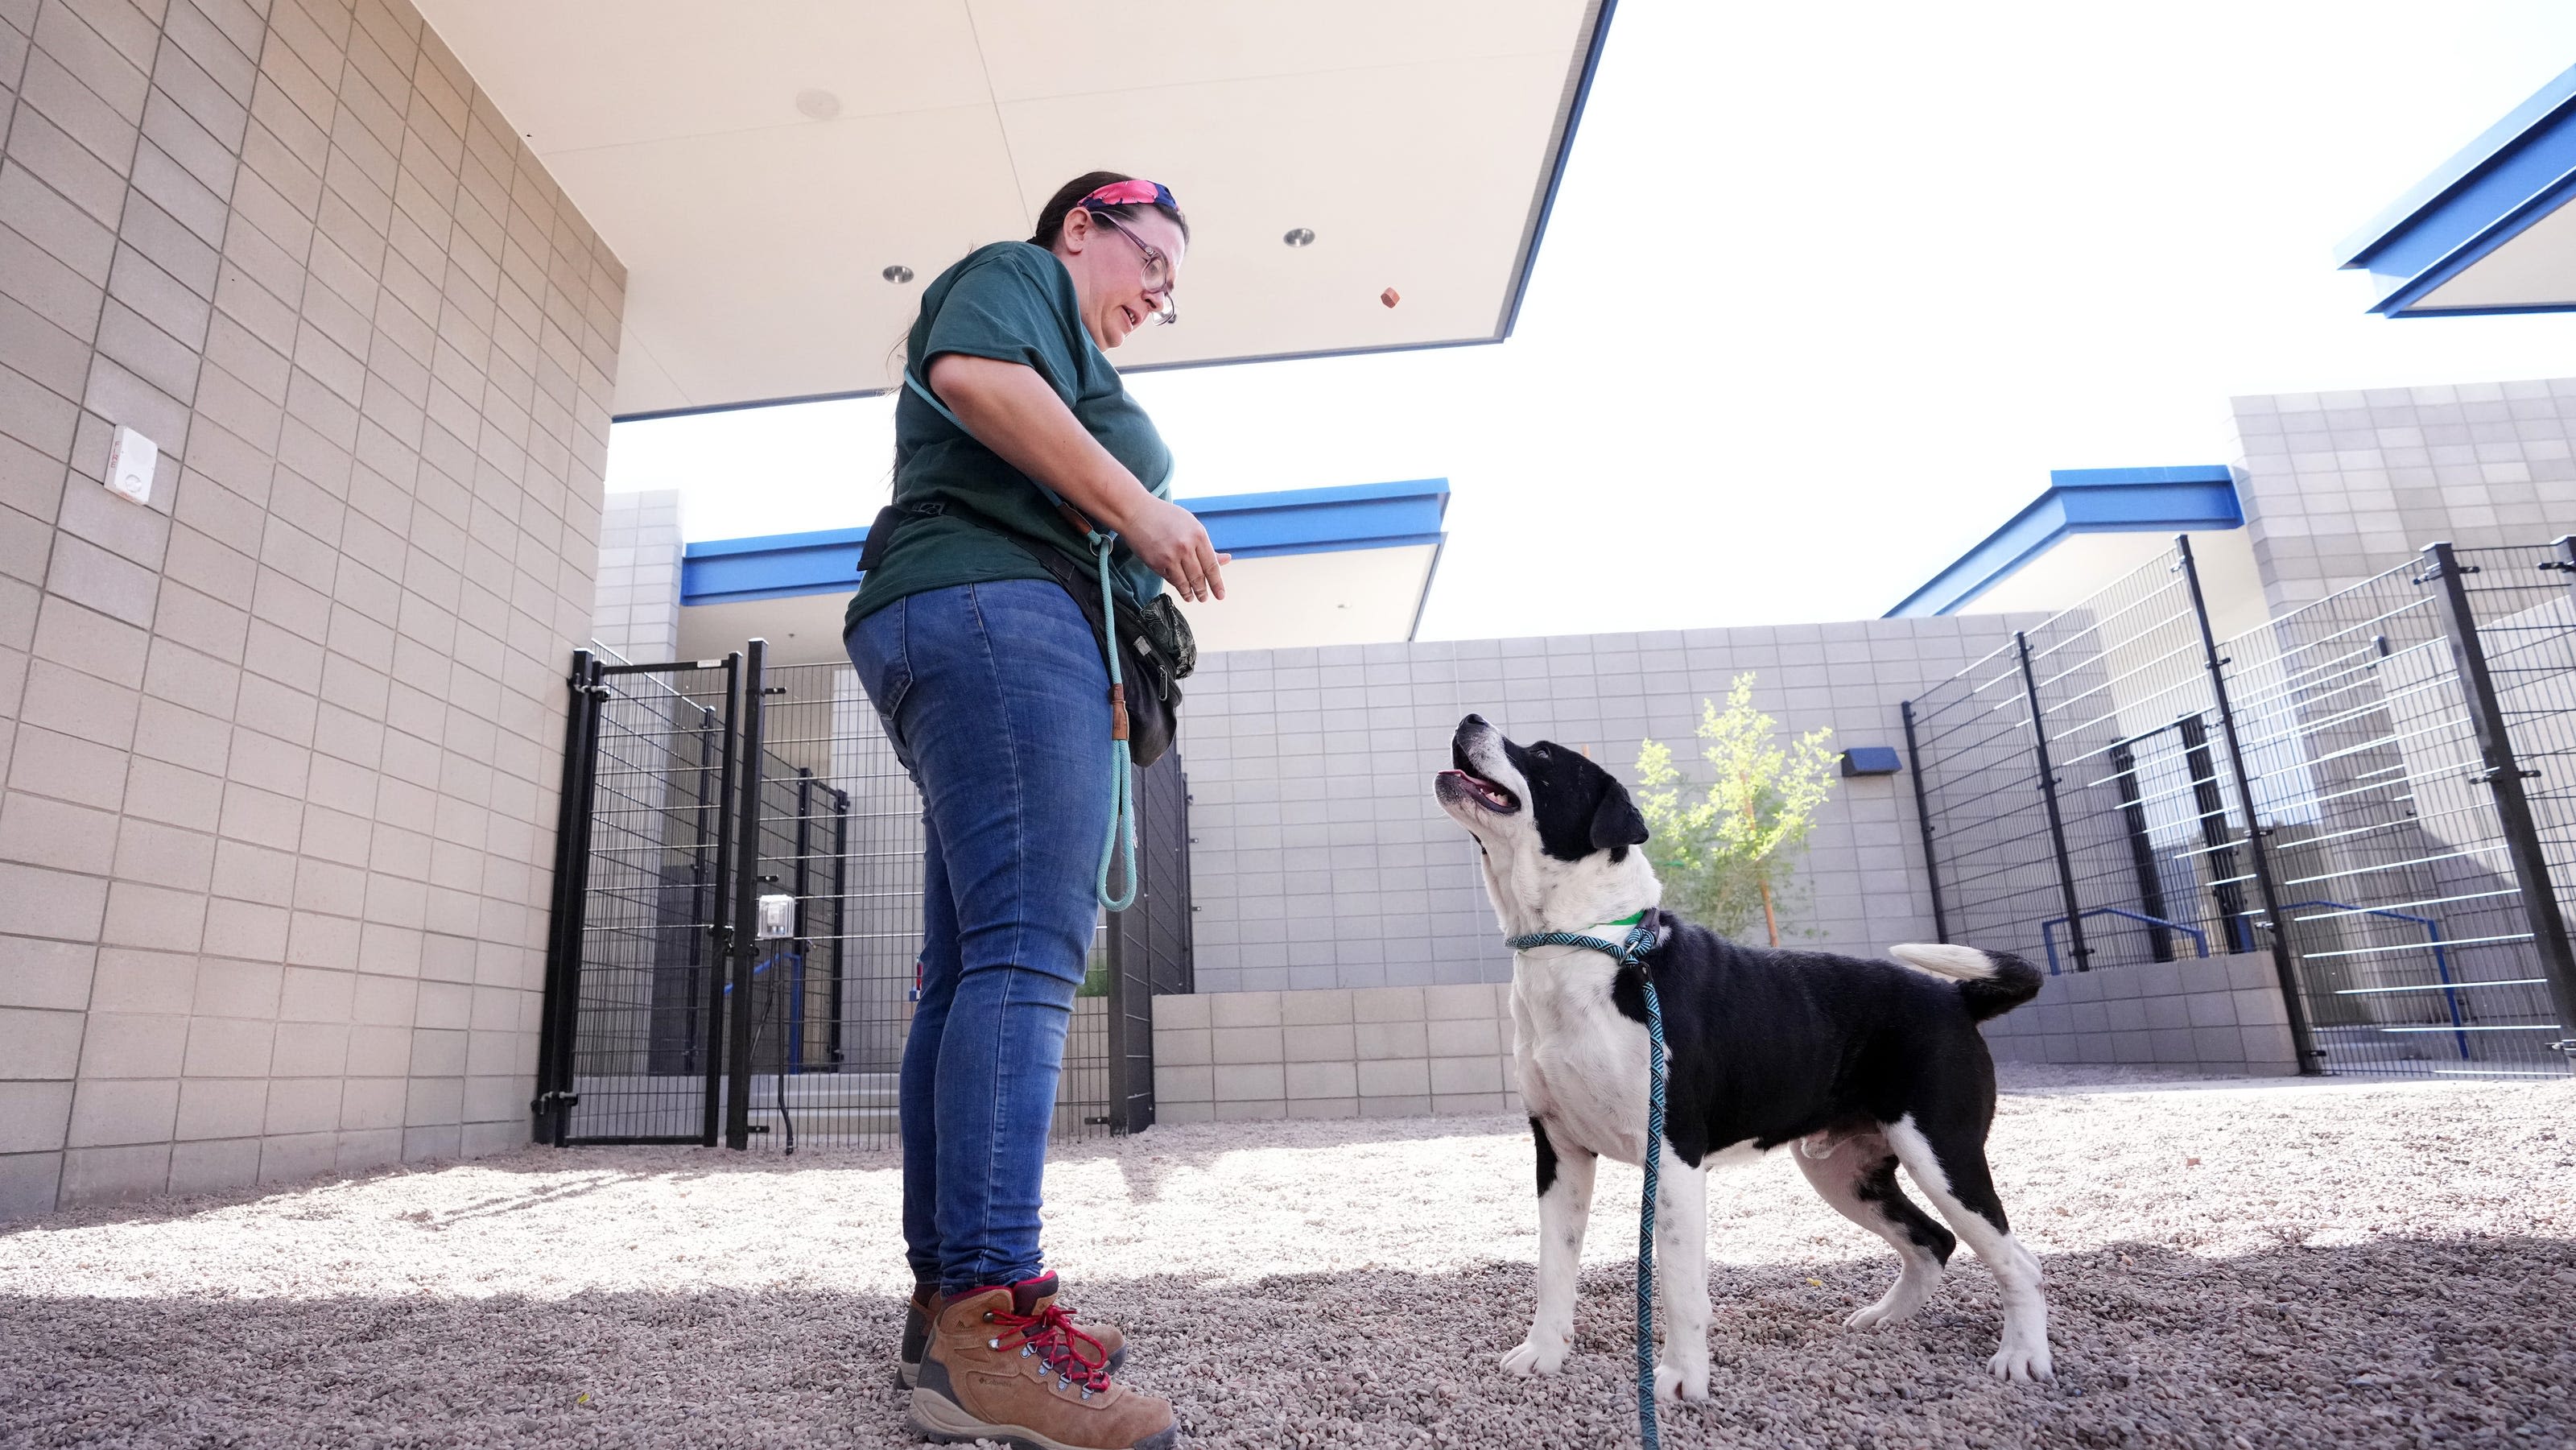 Maricopa County opens 'gorgeous' new $43M animal shelter in Mesa